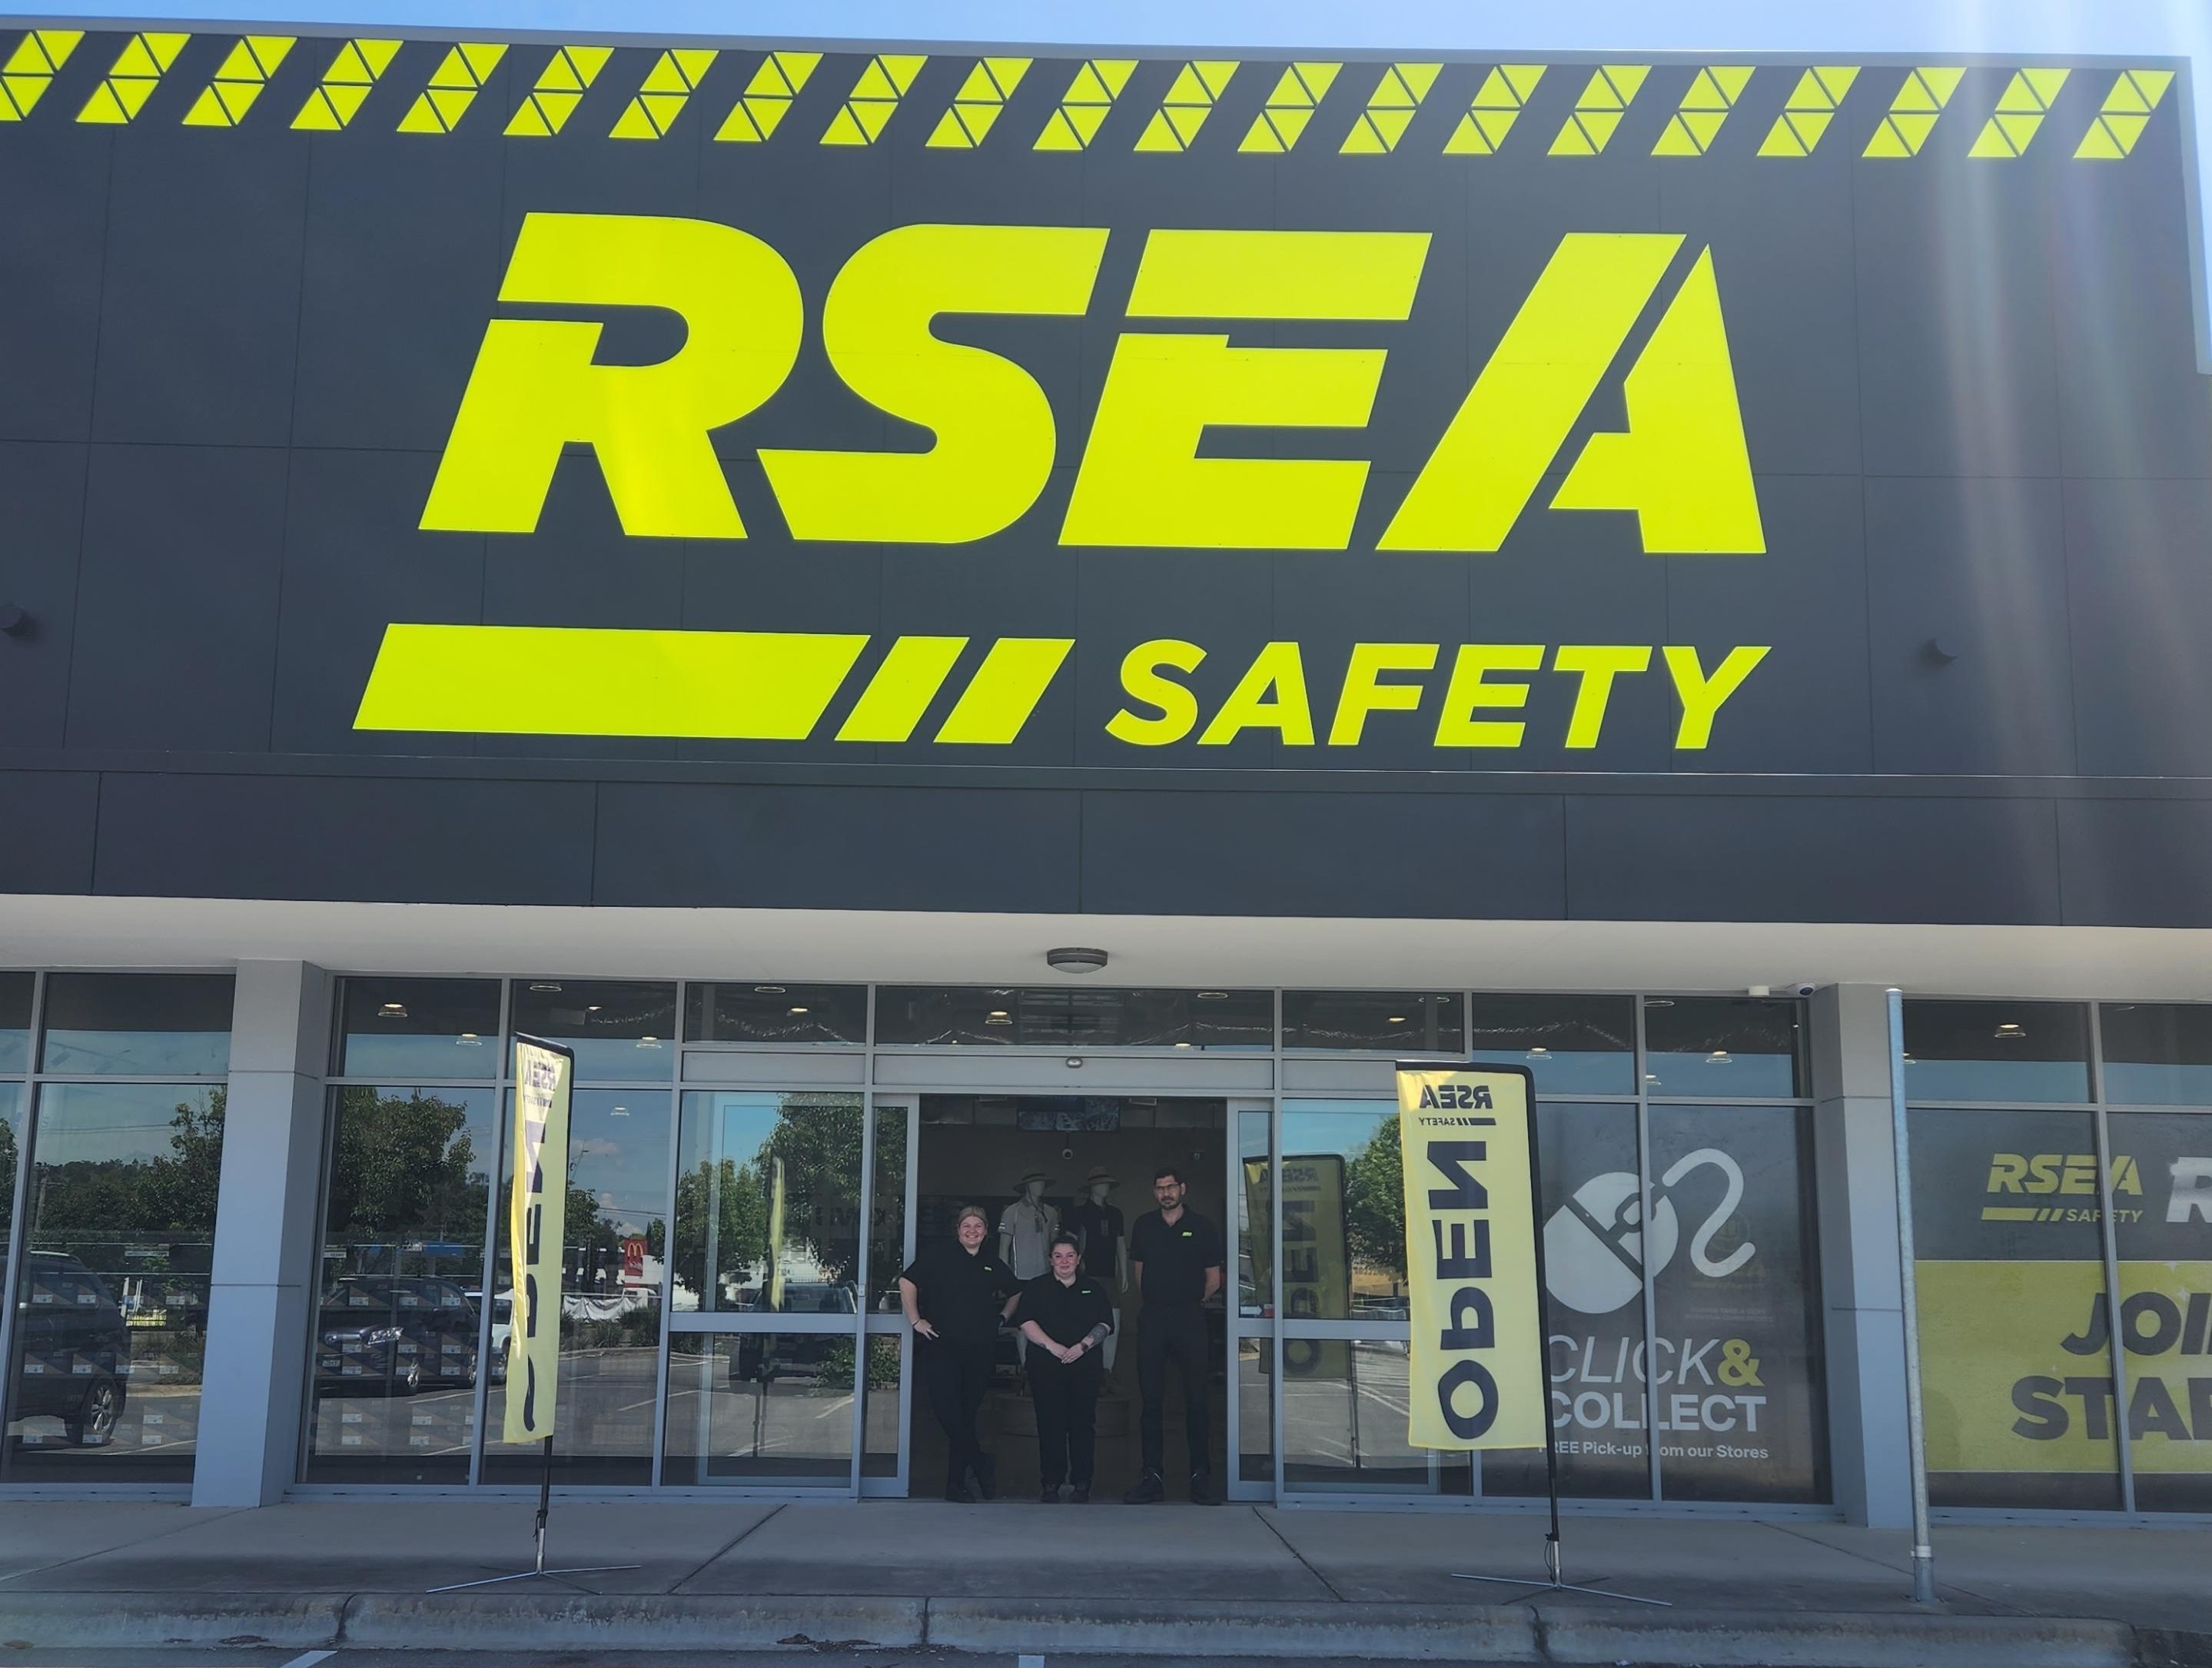 RSEA Safety Wagga Wagga Now Open